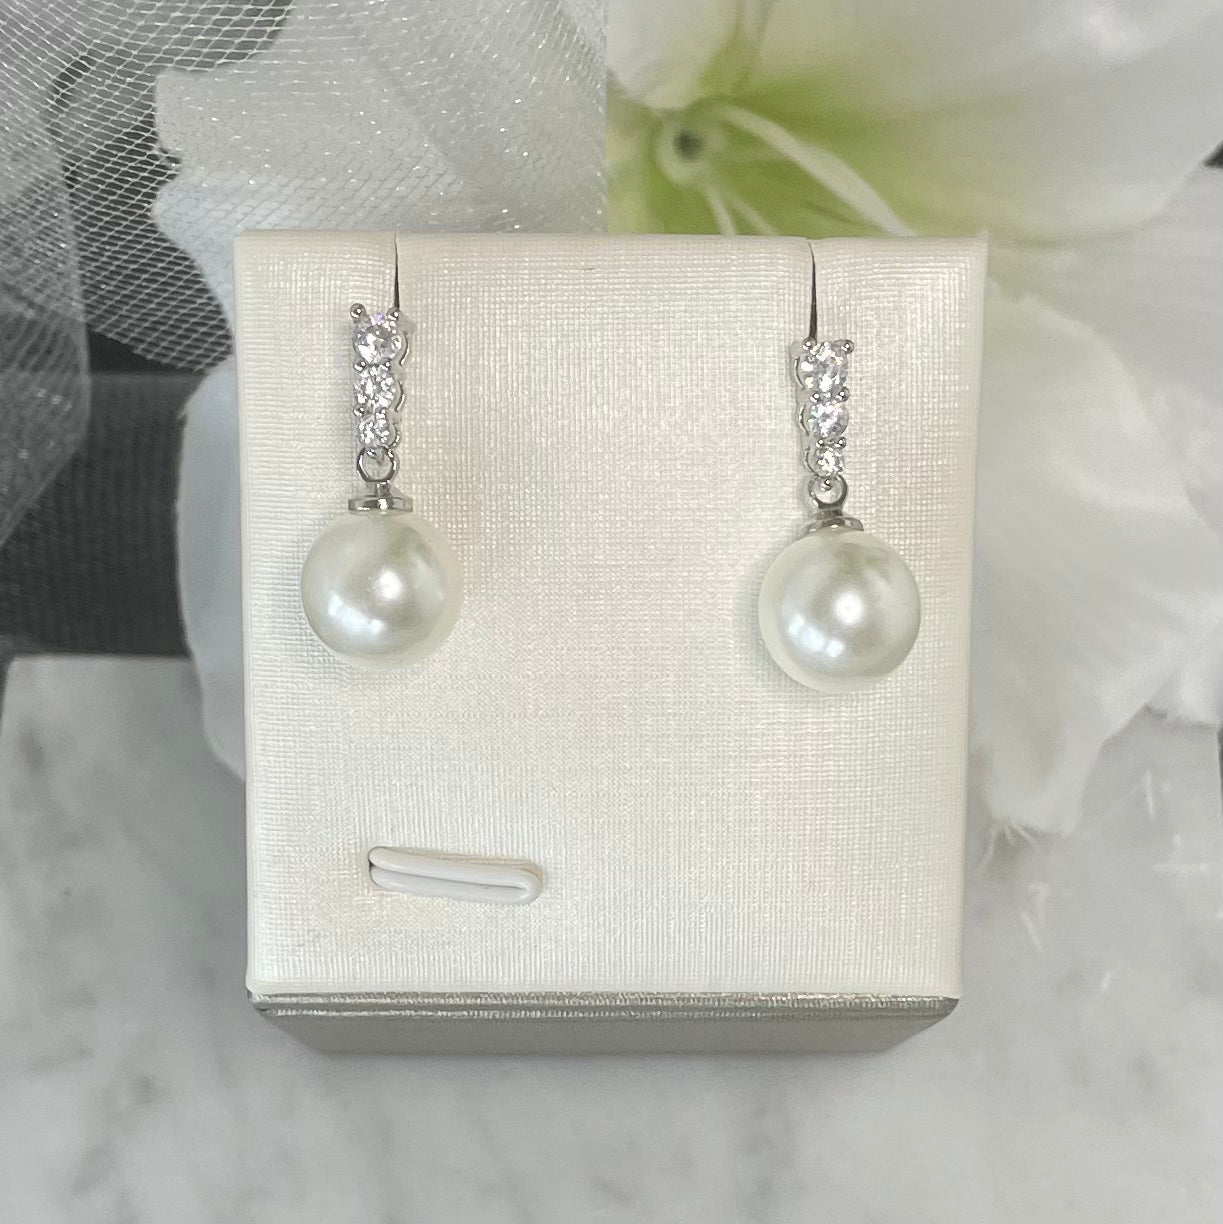 Close-up view of Everly Crystal Pearl Bridal Earrings featuring three varying-sized round crystals and a dangling pearl, perfect for elegant wedding day accessories.